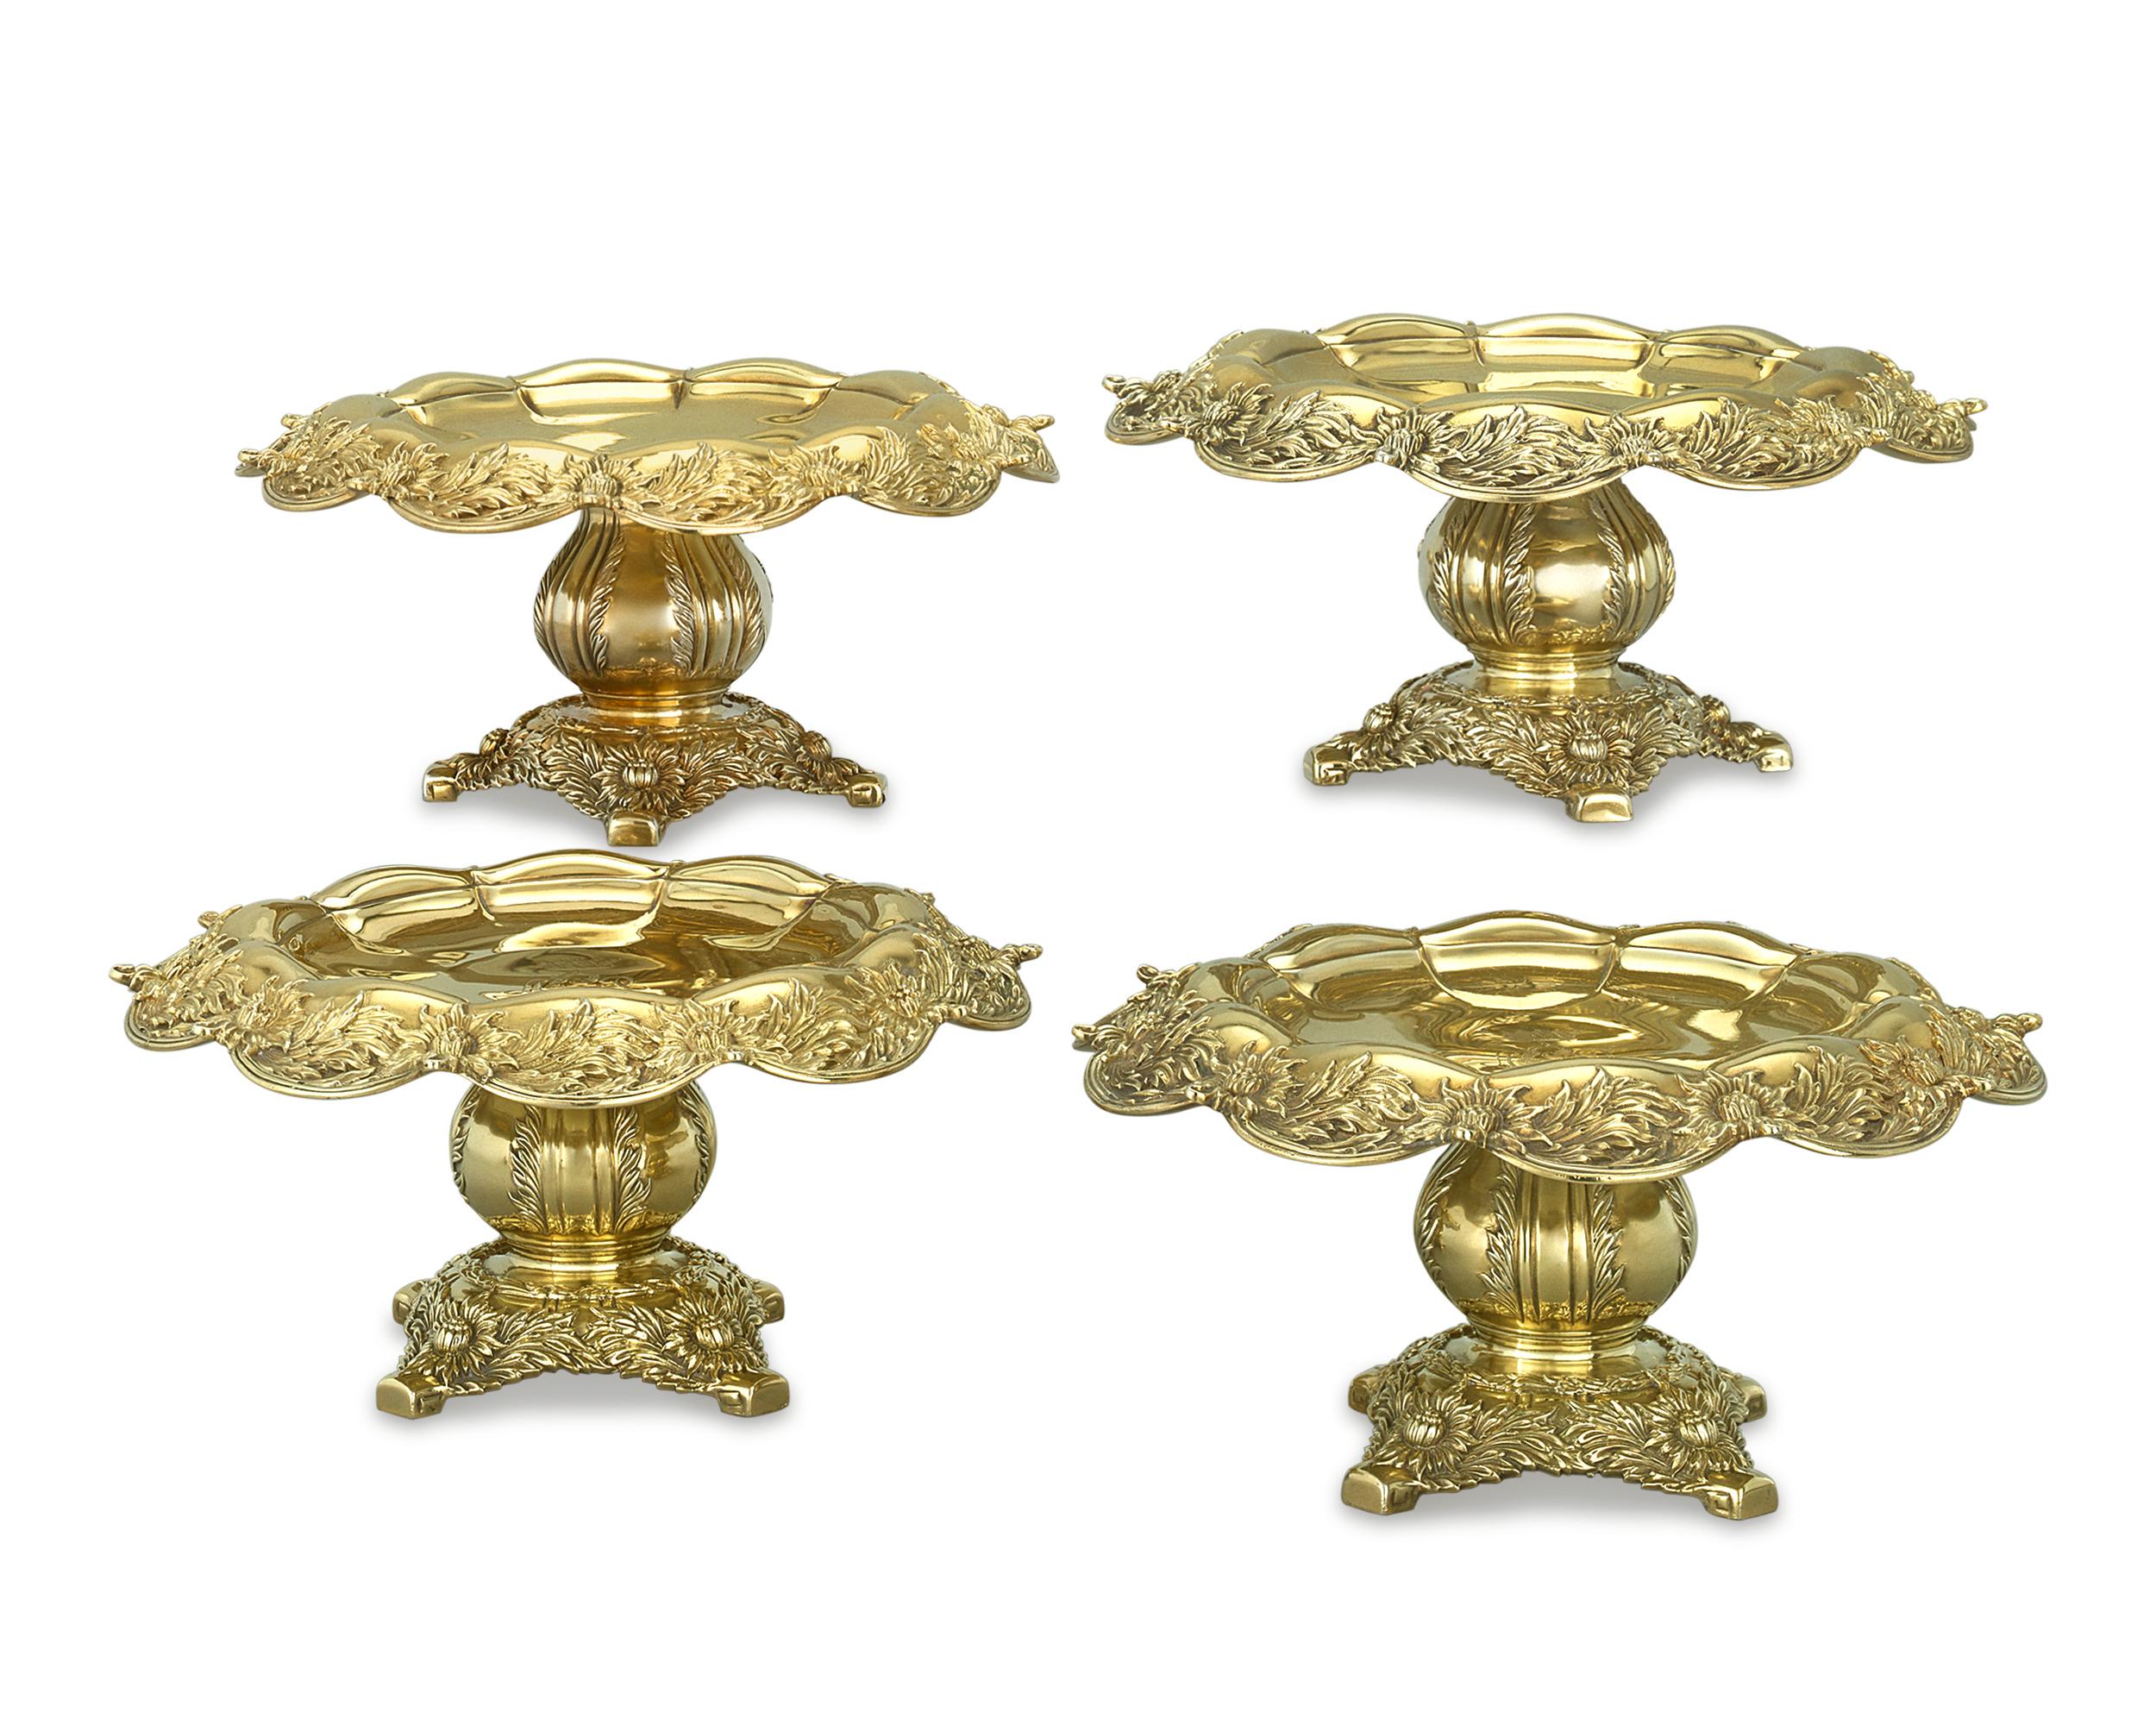 This impressive set of four Tiffany & Co. silver gilt tazze displays the highly popular and distinctive Chrysanthemum pattern. Sheer brilliance of workmanship is what truly sets apart this timeless pattern, which is still considered Tiffany's finest